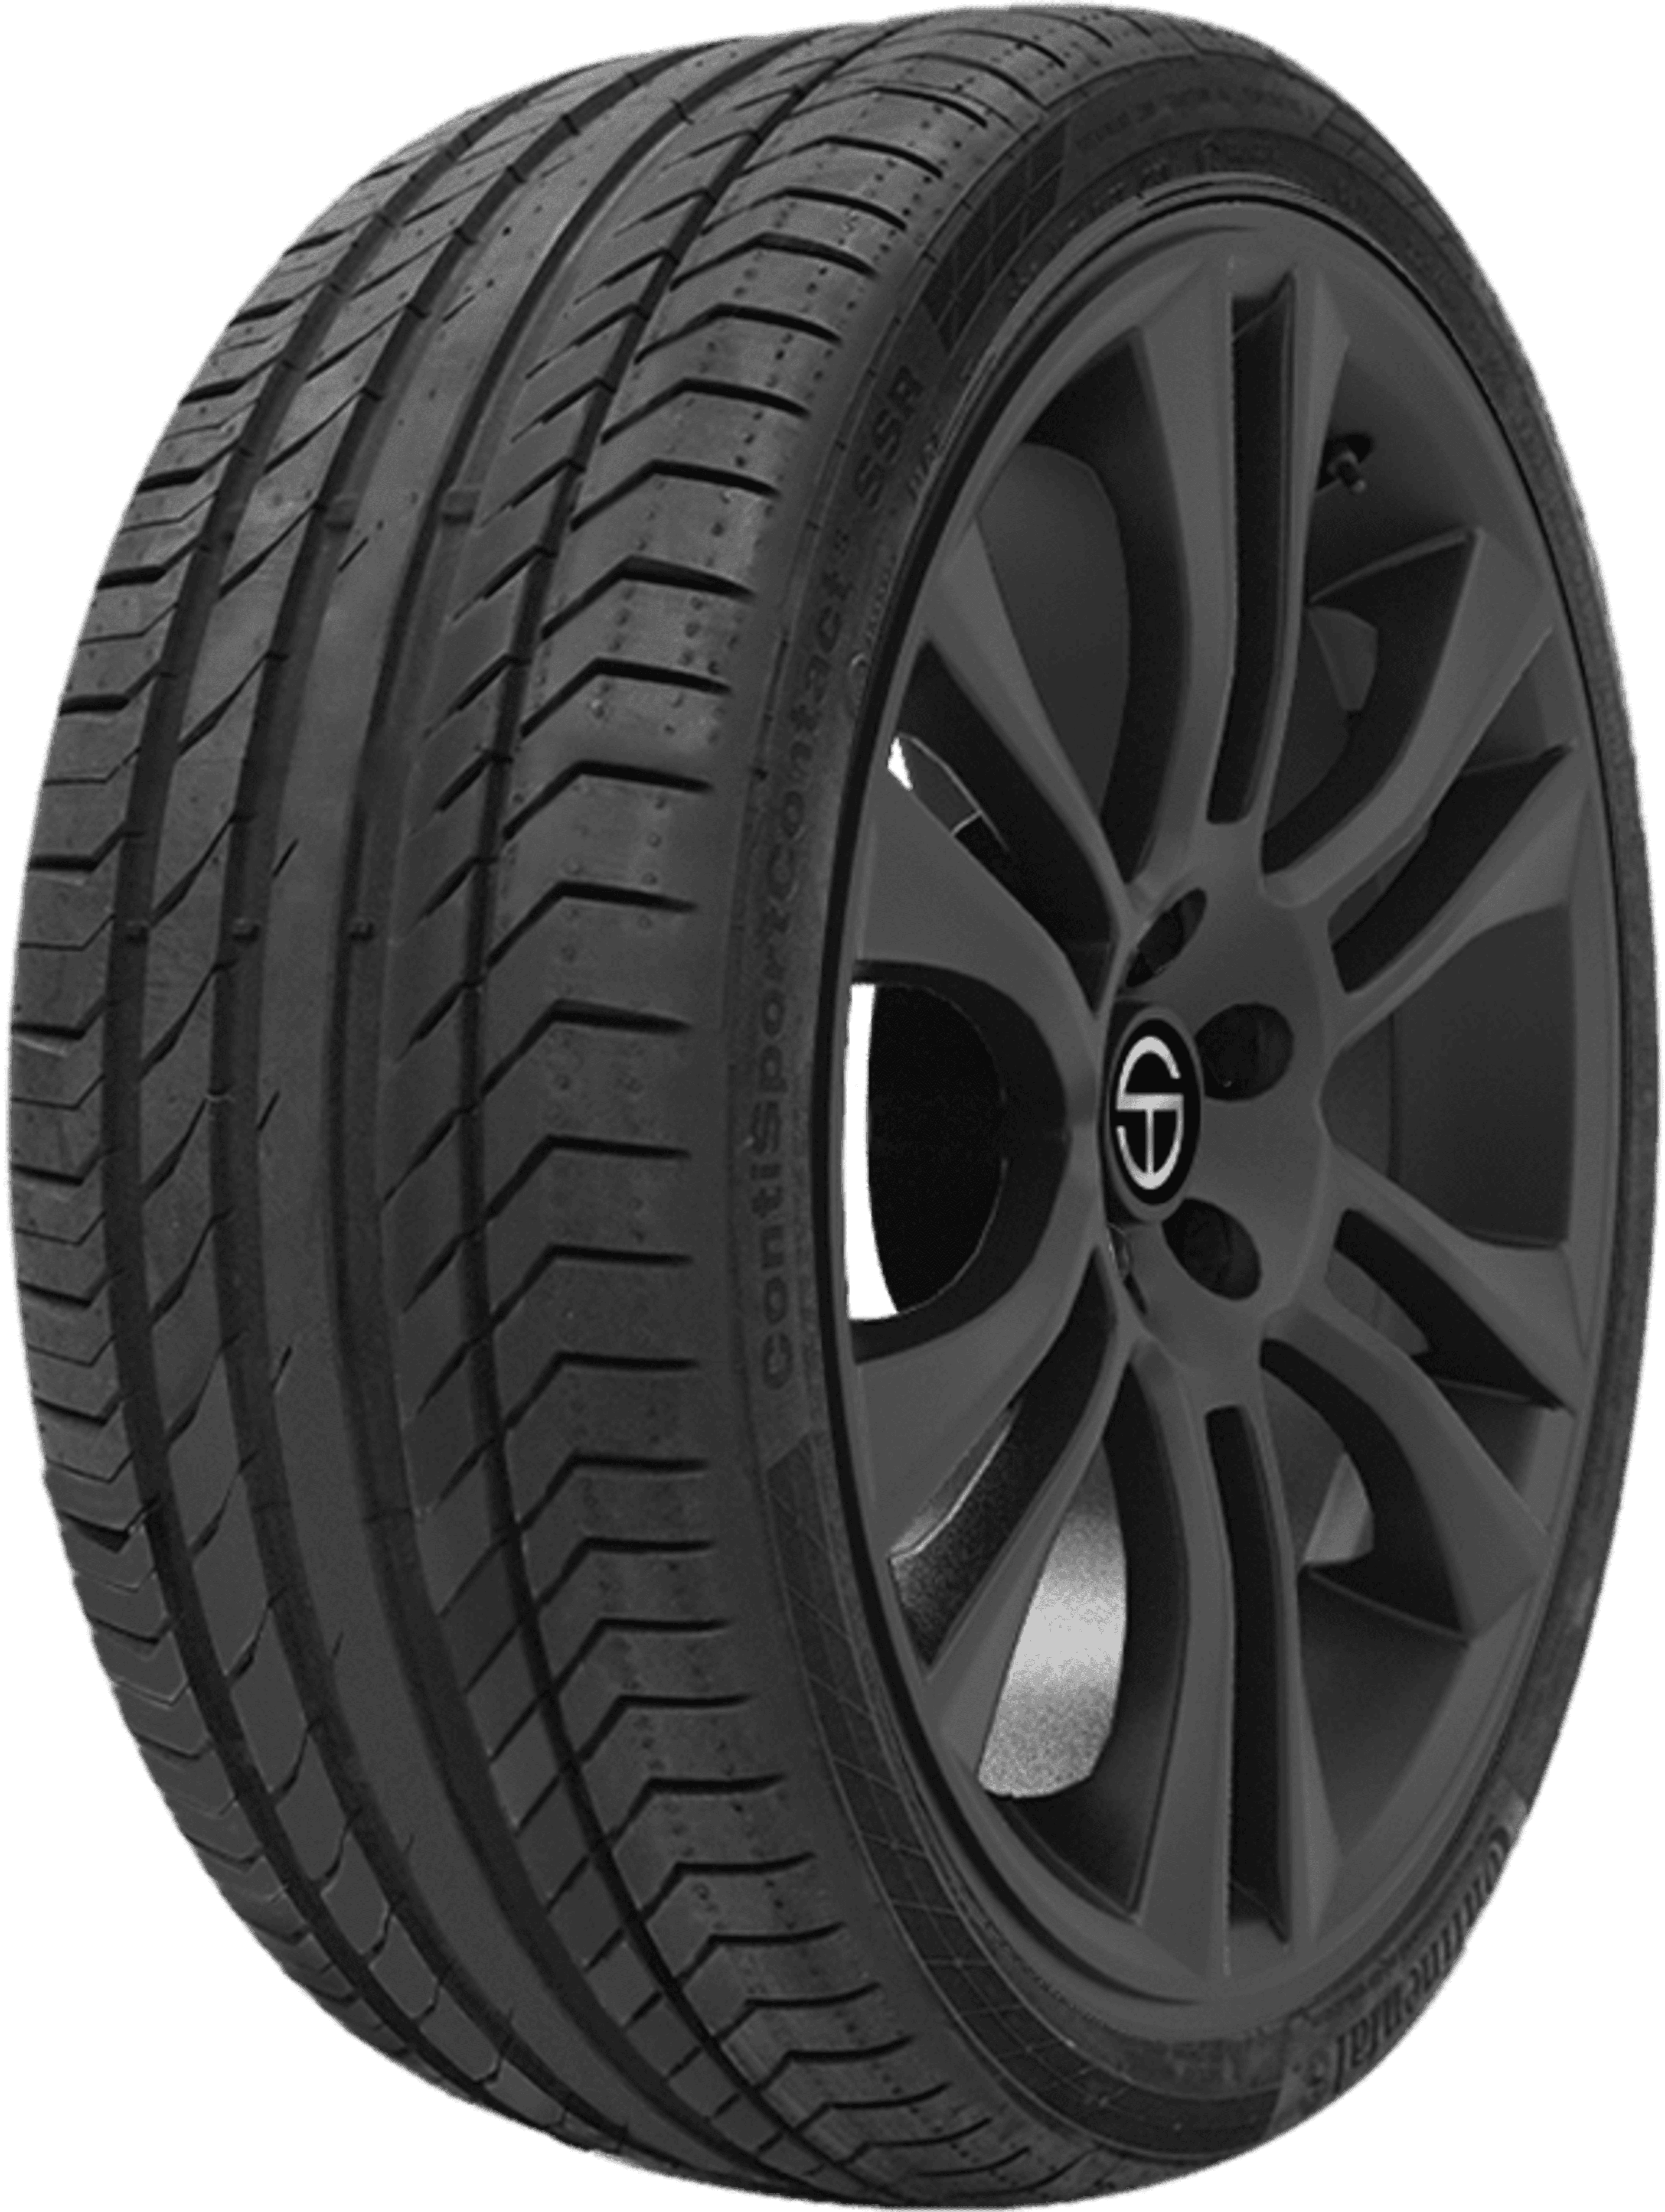 | - SimpleTire Online 5 Continental ContiSportContact Tires SSR Buy